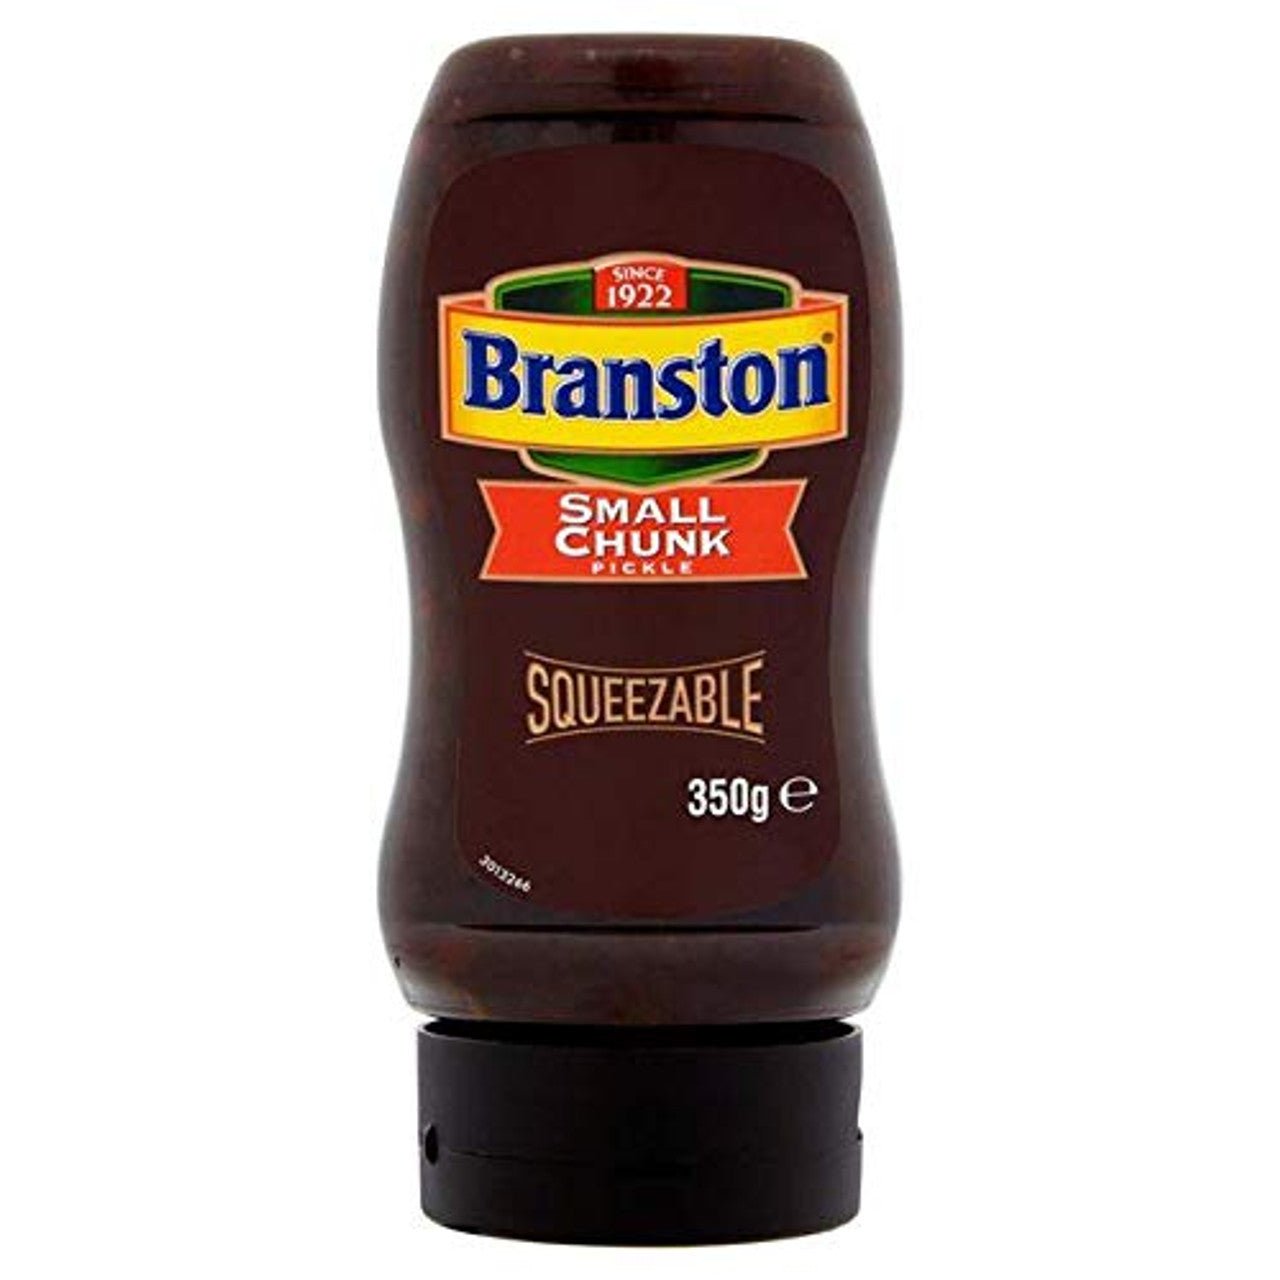 Branston Pickle Small Chunk Squeezy 360g.